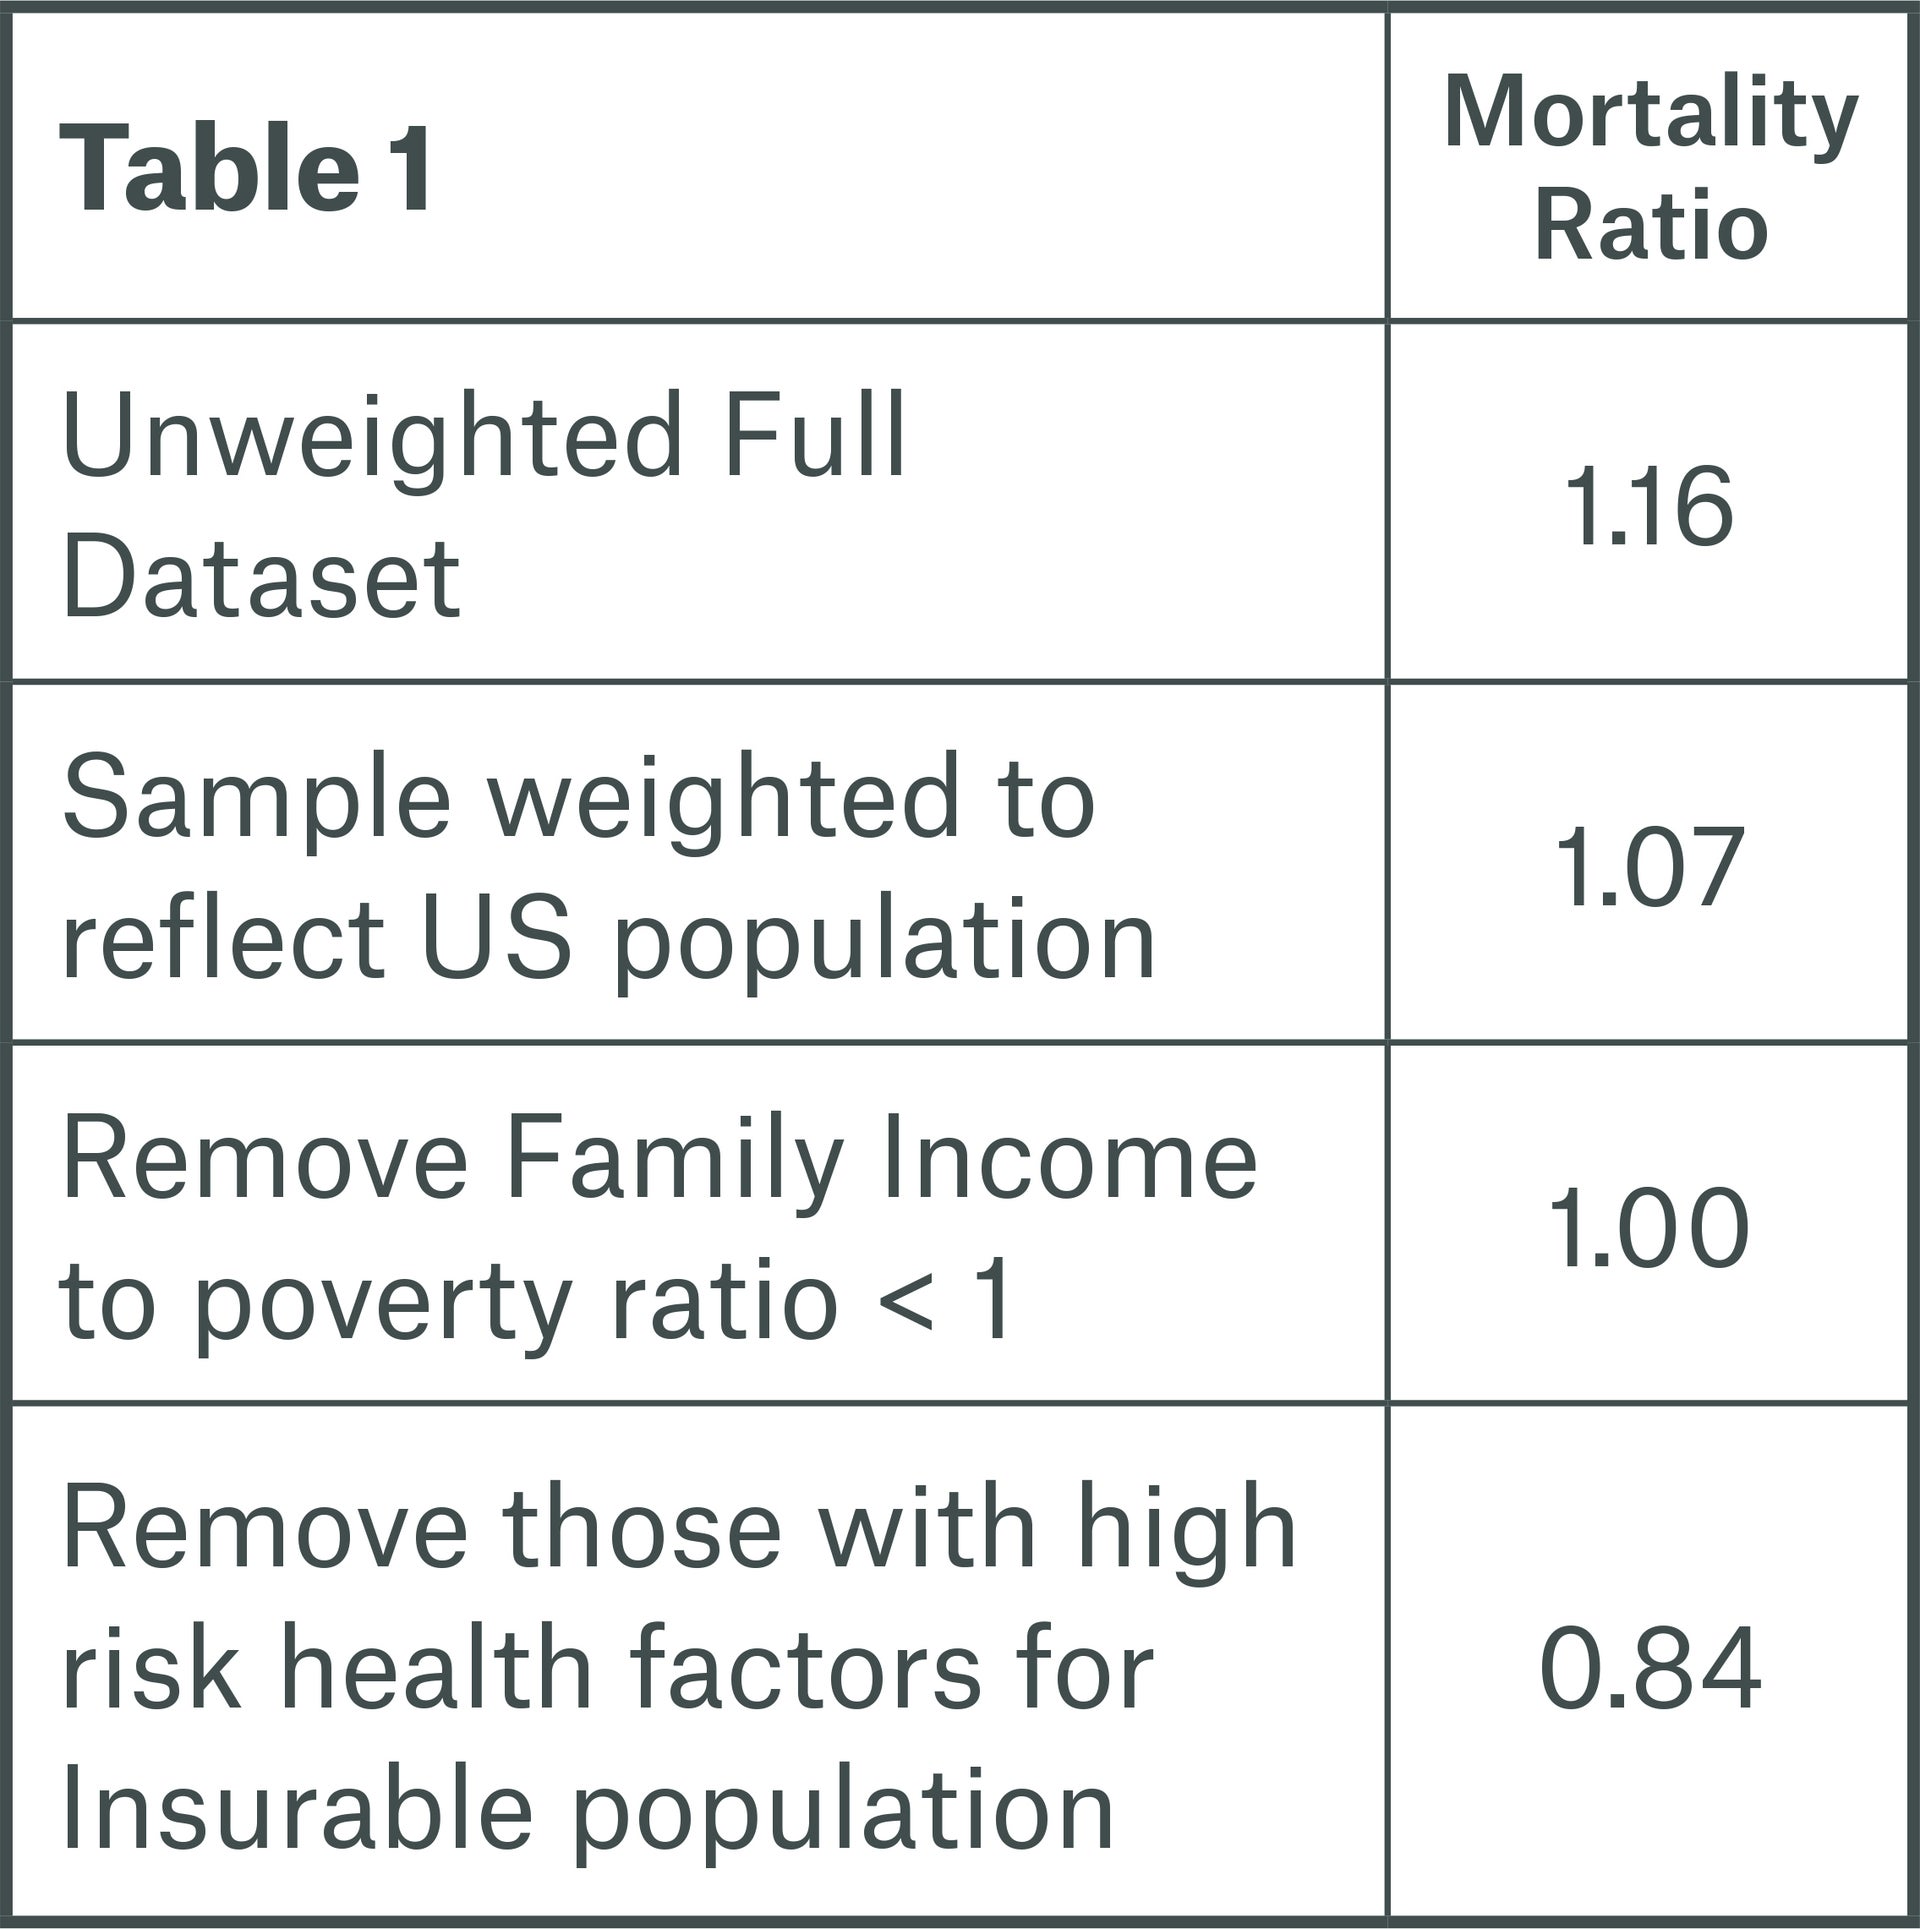 Table 1 Image xpected mortality ratios